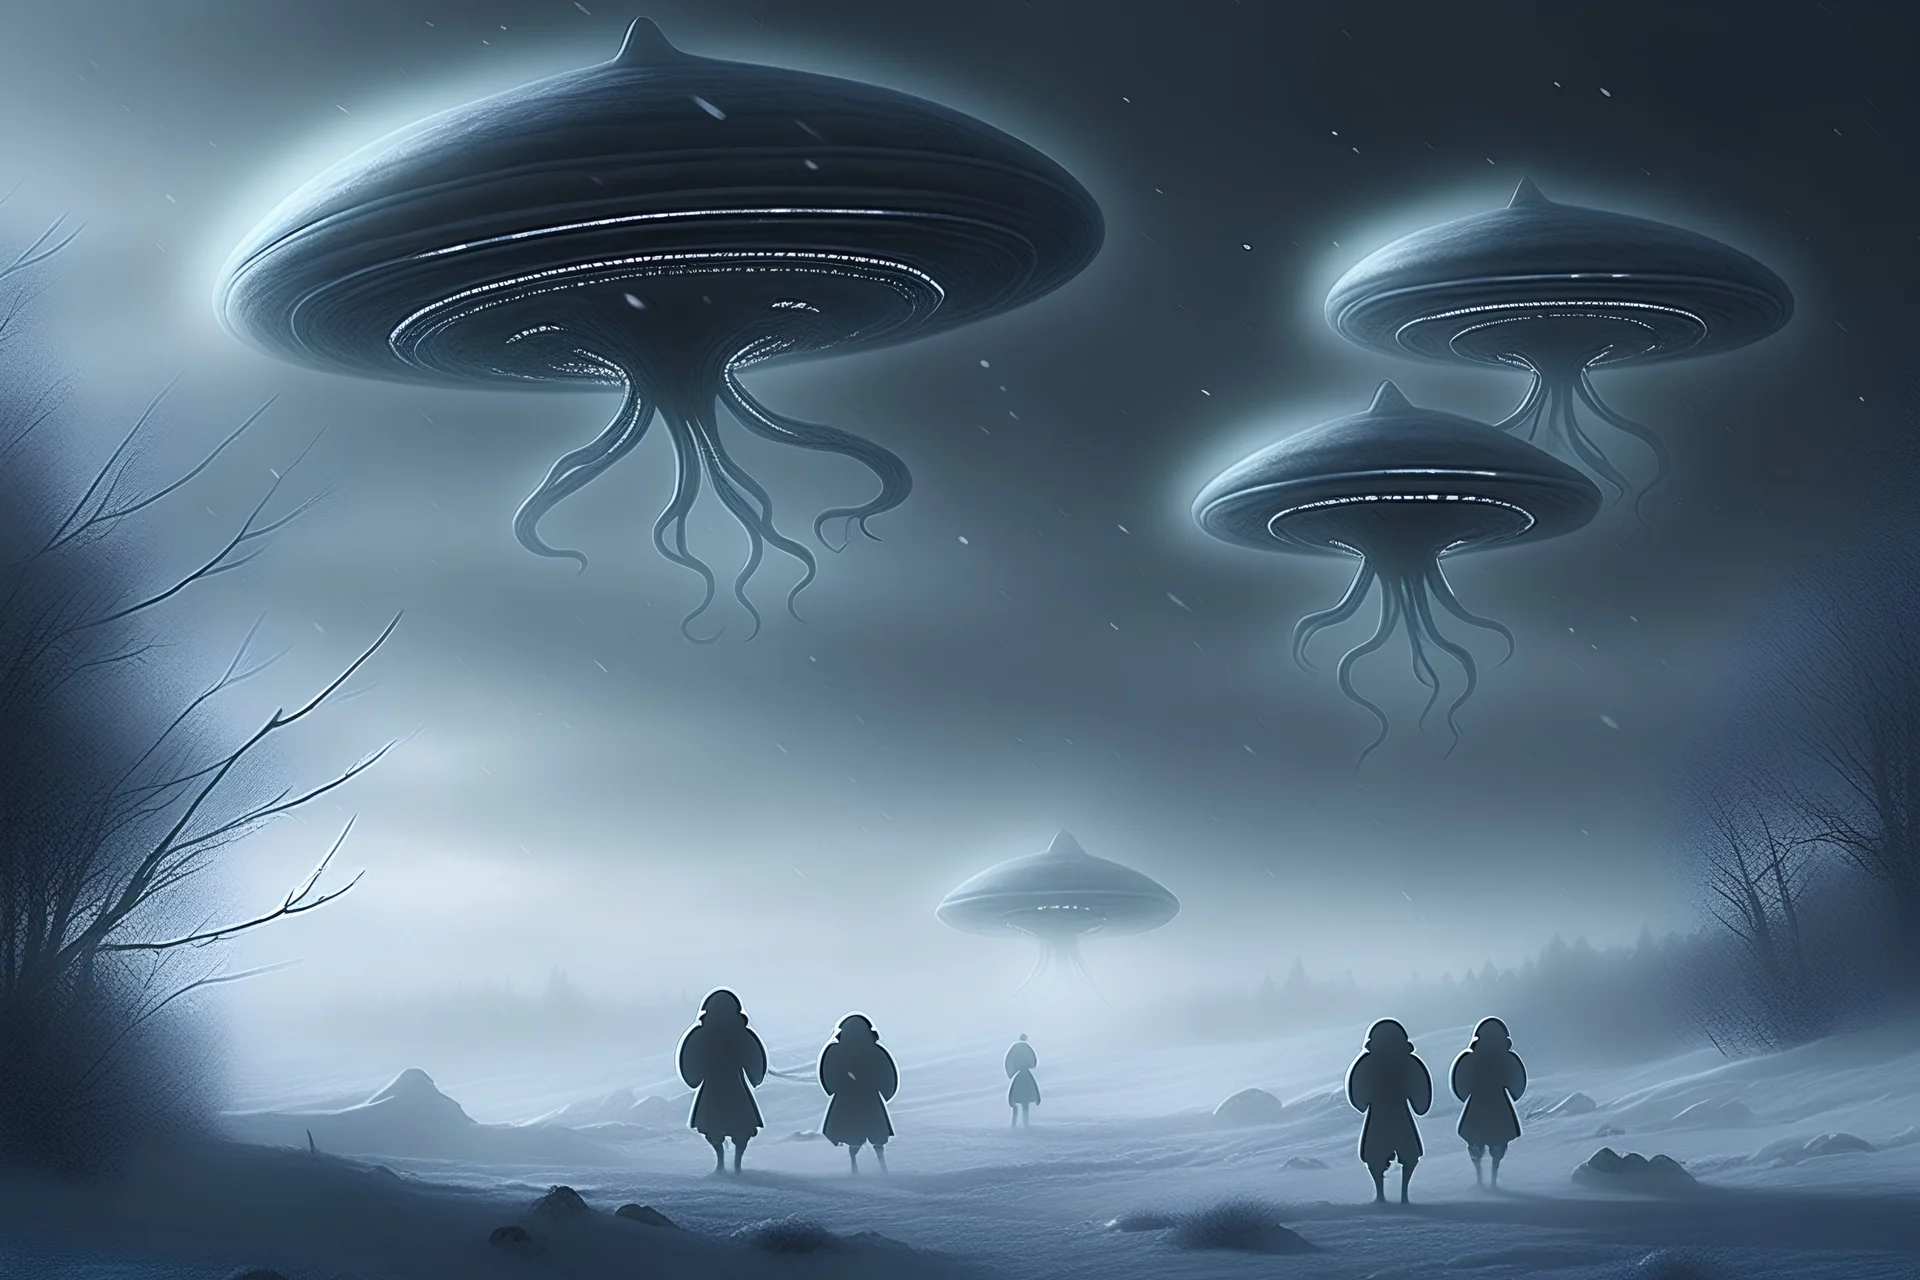 Image of aliens freeing in into their UFOs on a dark snowy day